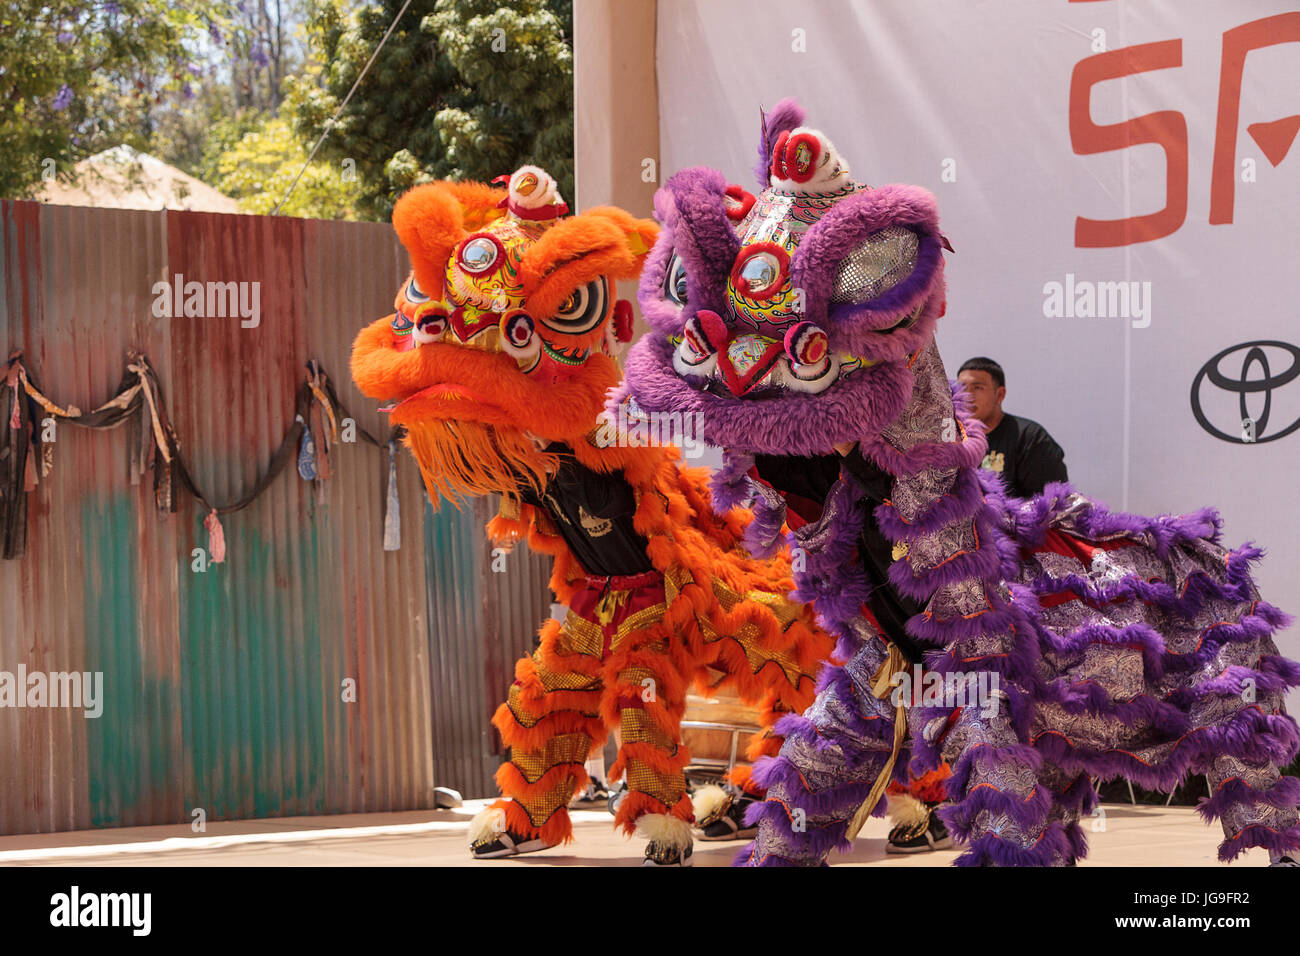 Dragon and lion dances at Fashion Valley! – Cool San Diego Sights!